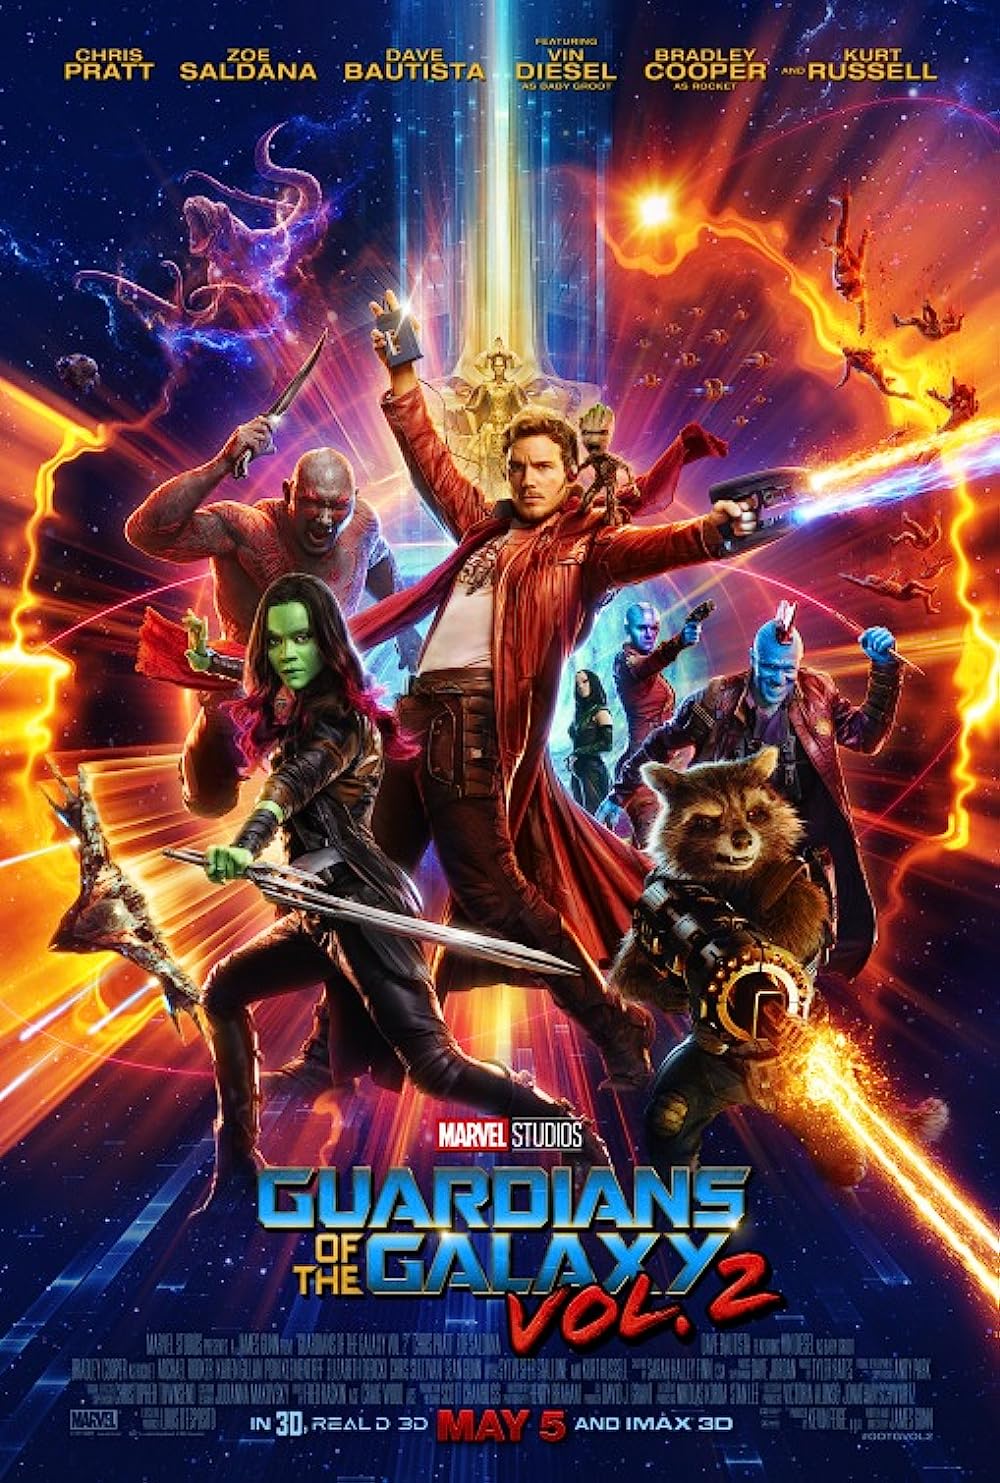 Guardians of the Galaxy Vol. 2 (May 5, 2017) - Reunite with the lovable misfits of the galaxy as they uncover mysteries of Star-Lord's past while facing cosmic threats.